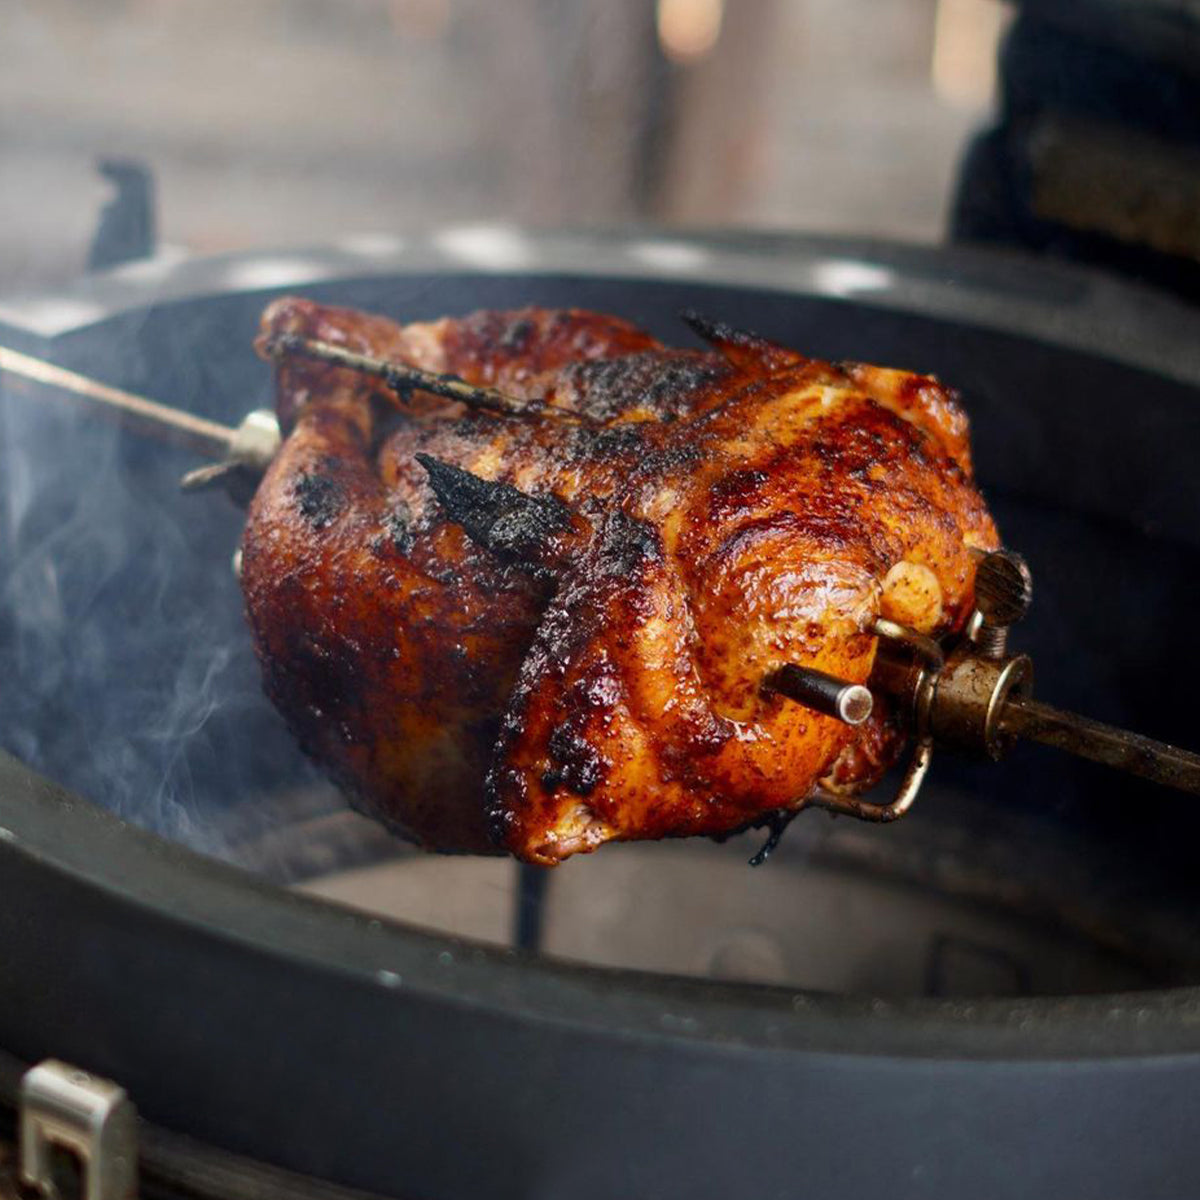 This wireless meat thermometer makes grilling, roasting, and more so easy